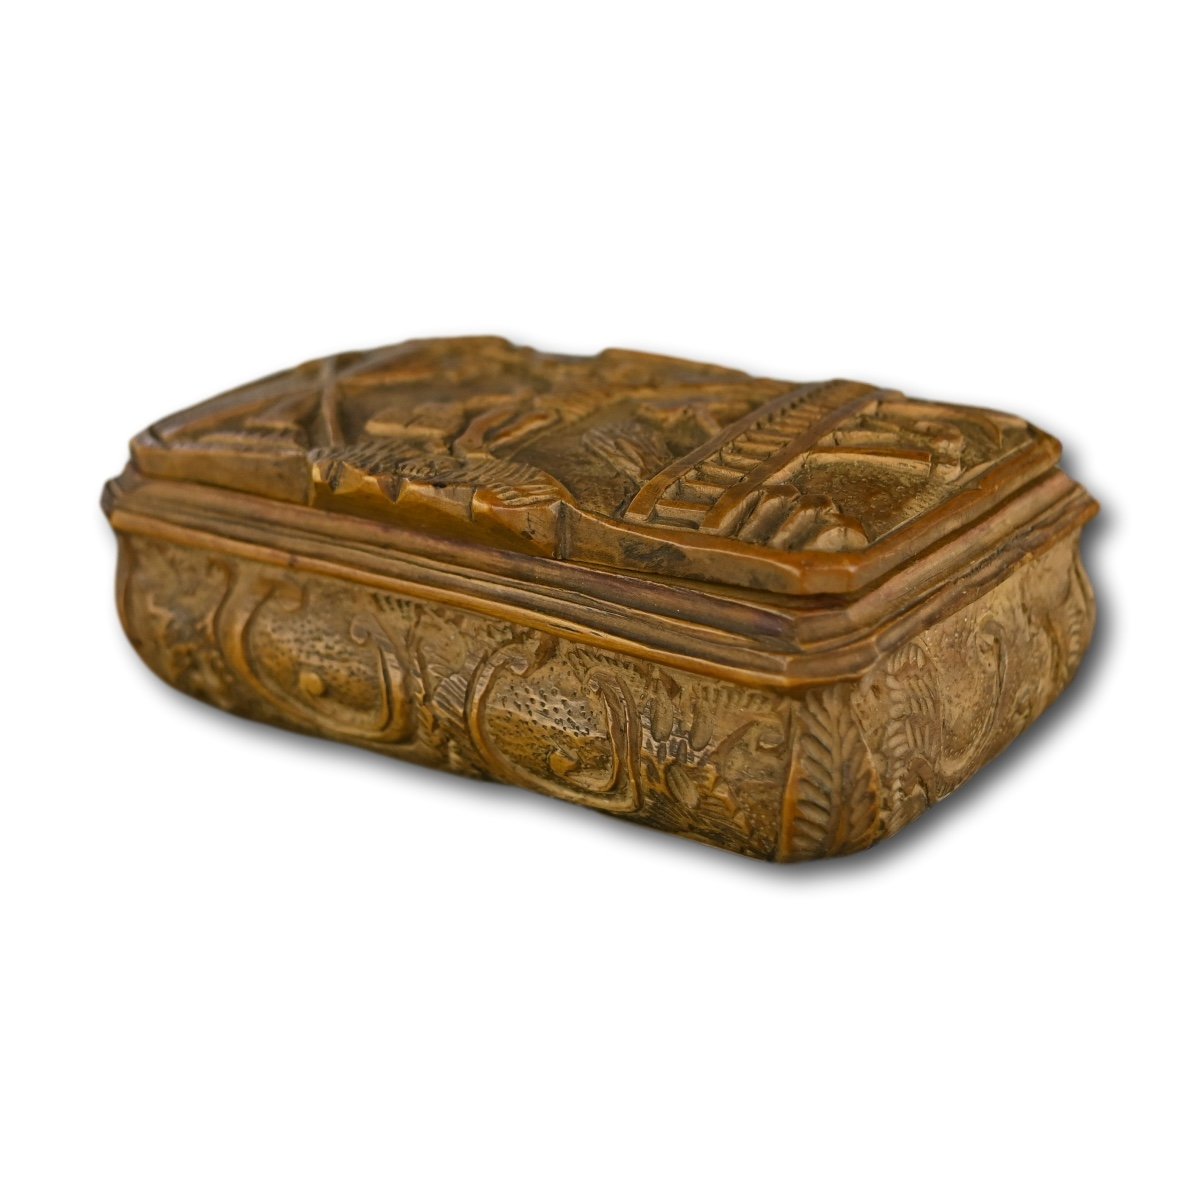 Boxwood Snuff Box Carved With The Crucifixion. German, 18th Century.-photo-5